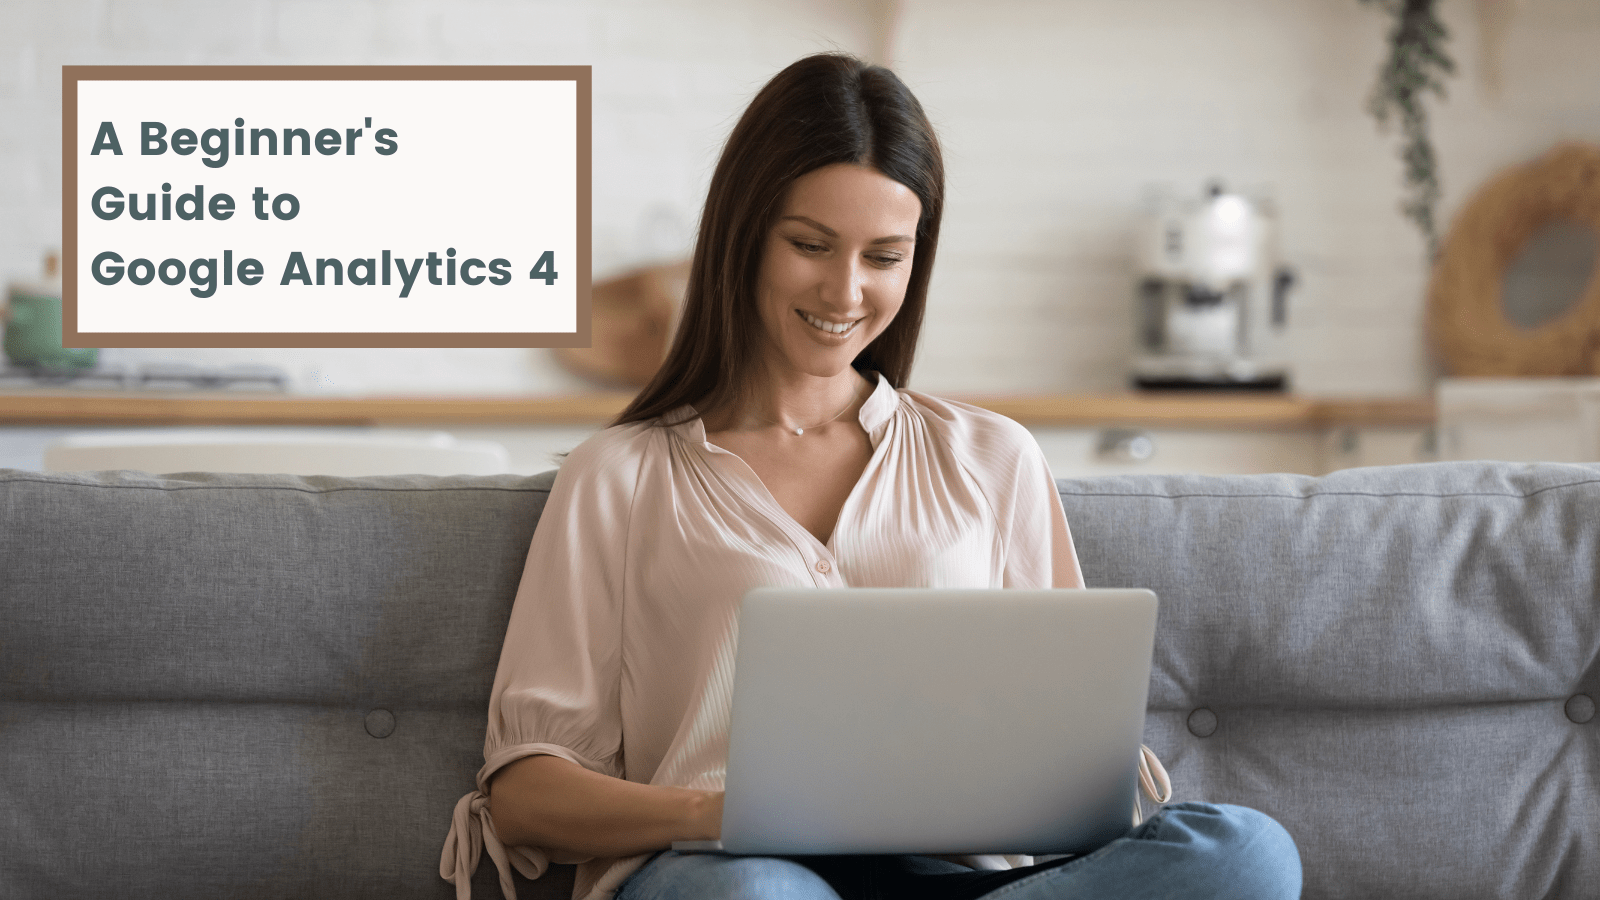 A Beginner's Guide to Google Analytics 4